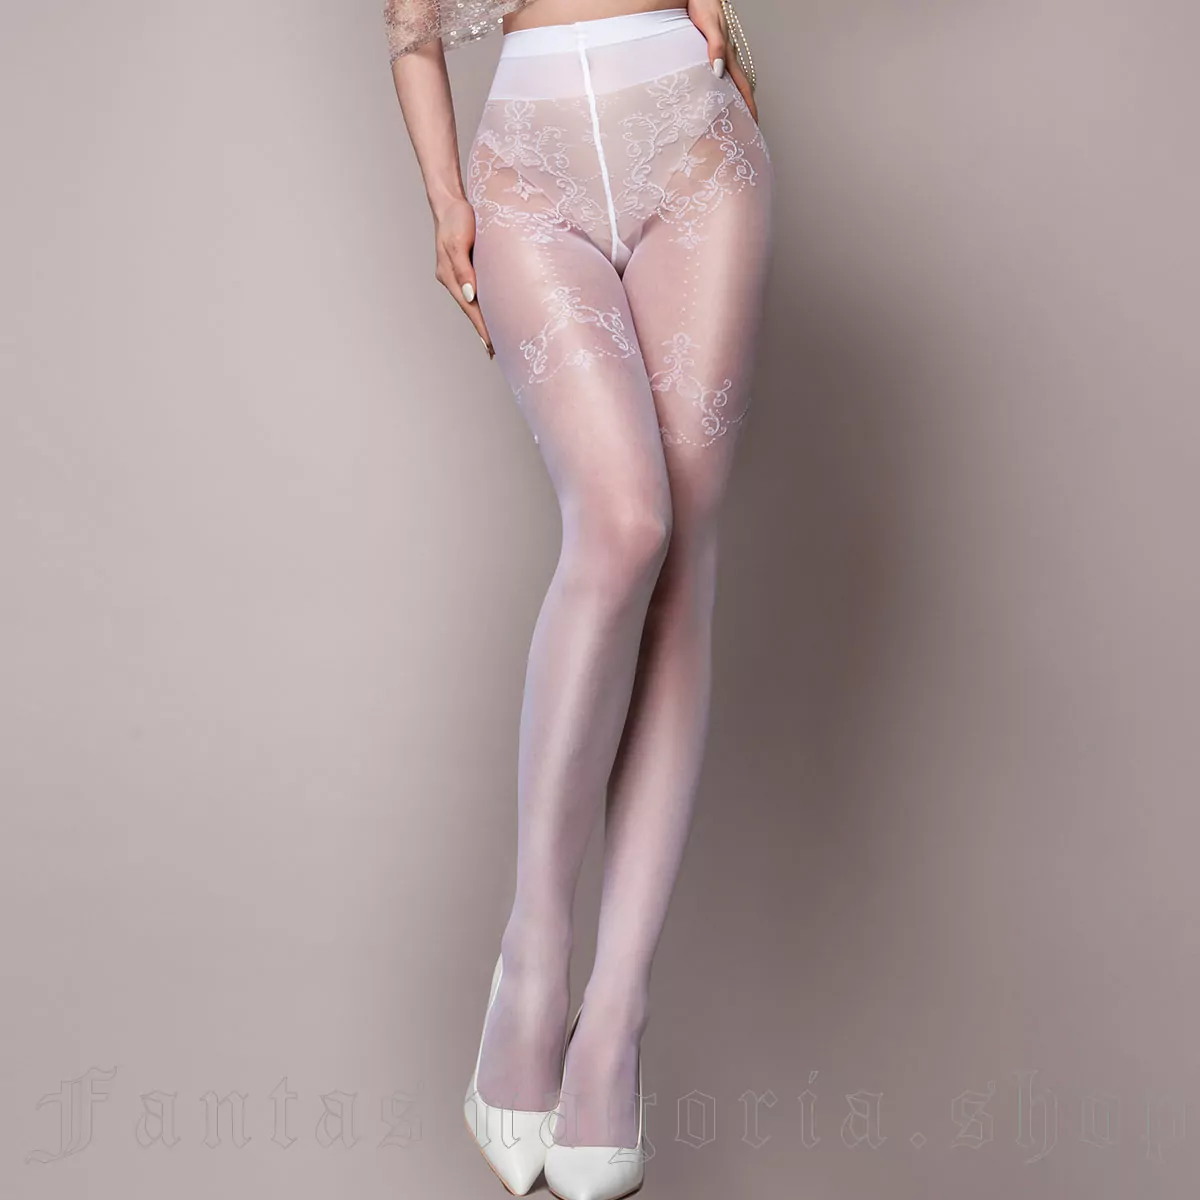 Sheer White Tights 